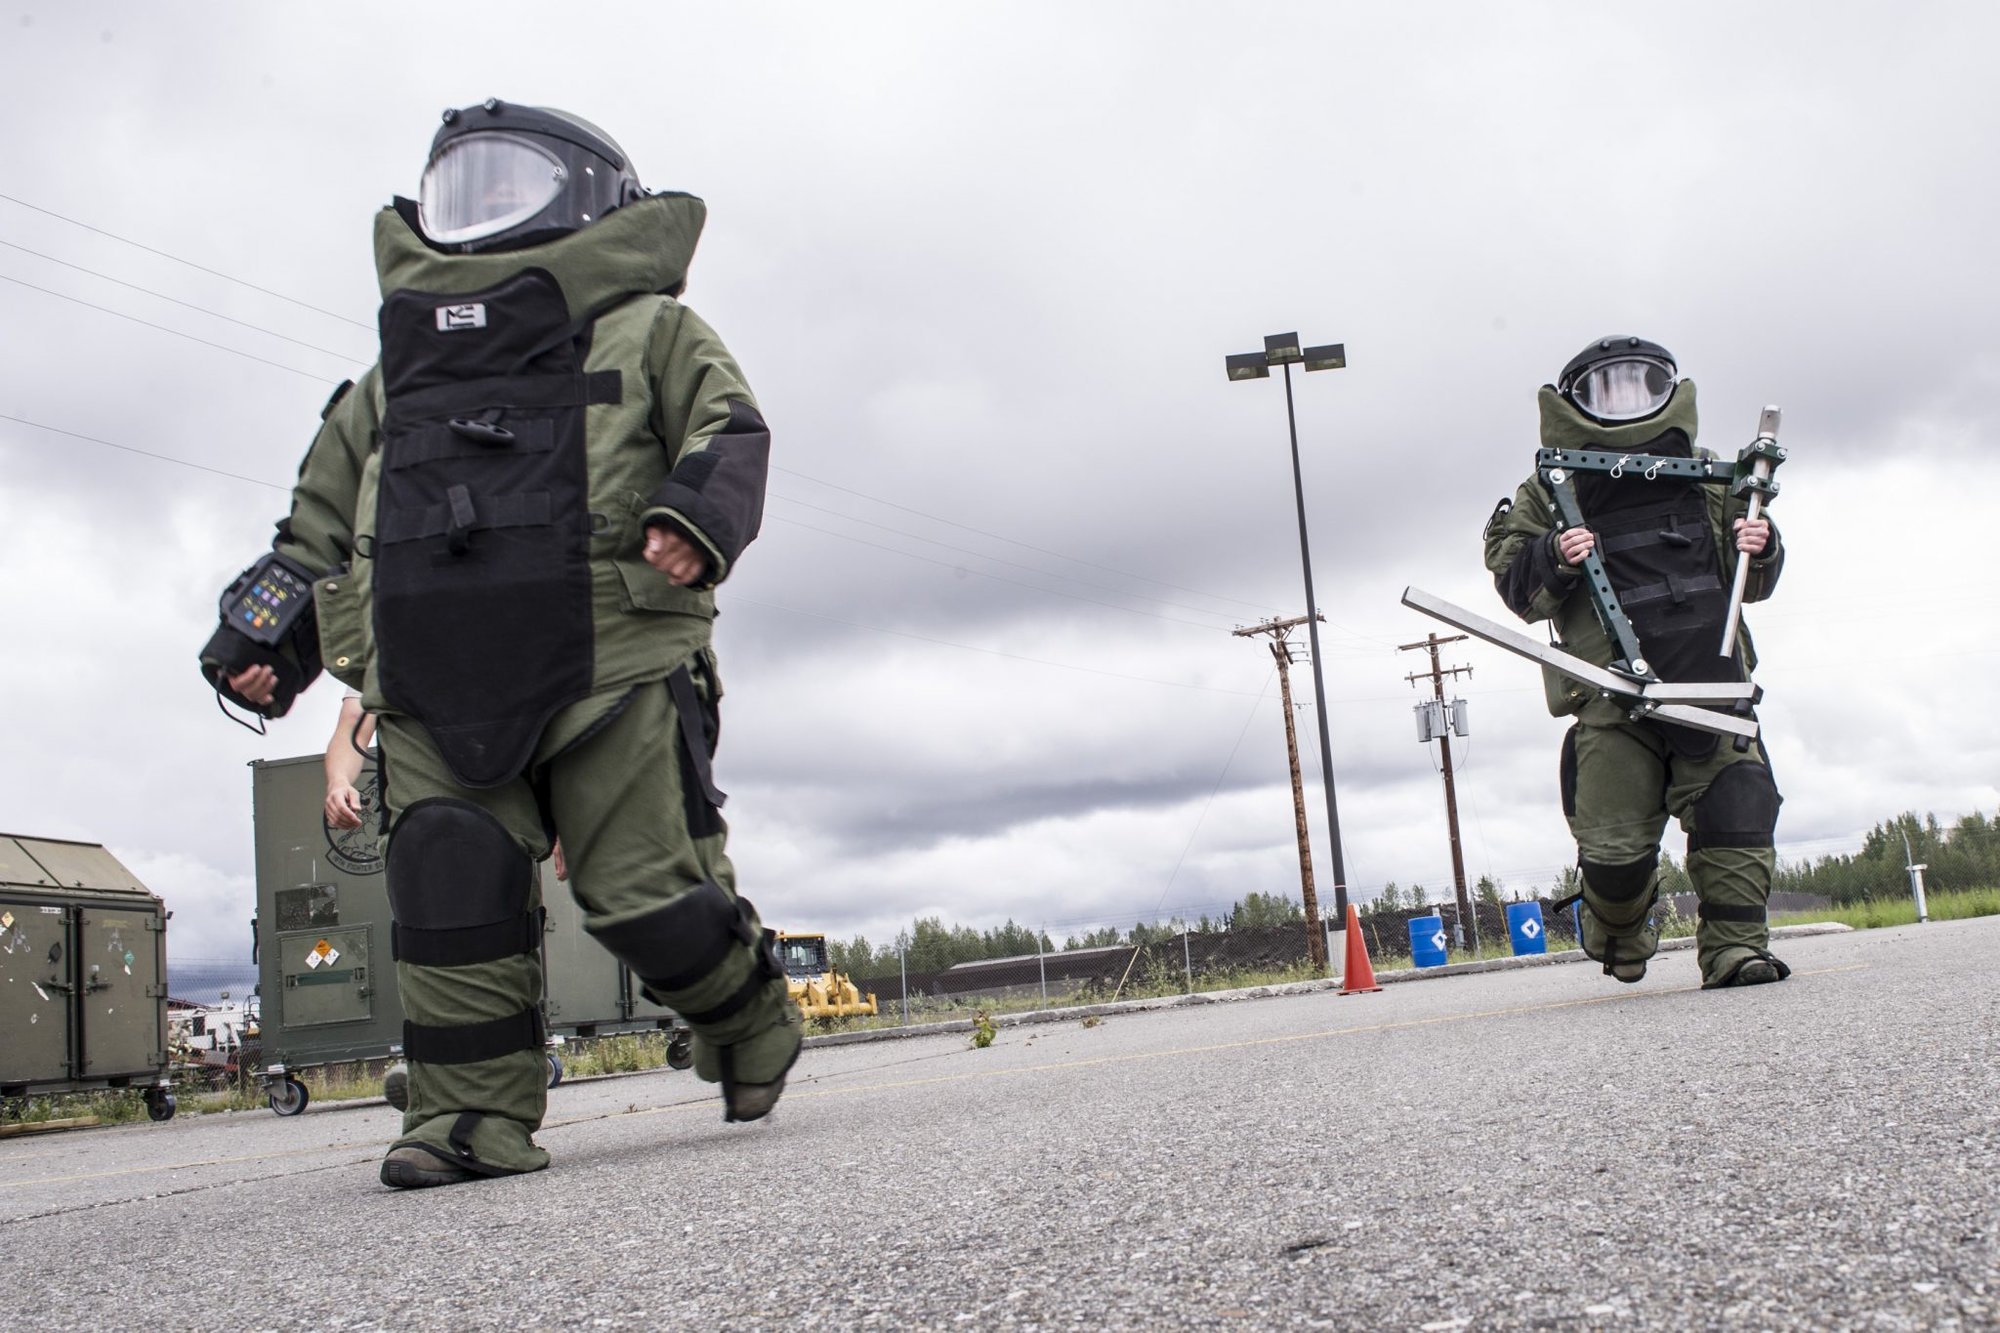 U.S. Air Force Airmen 1st Class Alex Westing and Devin Paulino, both with the 354th Comptroller Squadron, race through an obstacle course during an explosive ordnance disposal work center tour July 25, 2014, Eielson Air Force Base, Alaska. The Airmen put on an 80-pound EOD 9 bomb suit, raced back and forth in a parking lot and attempted to locate inert improvised explosive devices in and around a Humvee. (U.S. Air Force photo by Senior Airman Joshua Turner/Released)